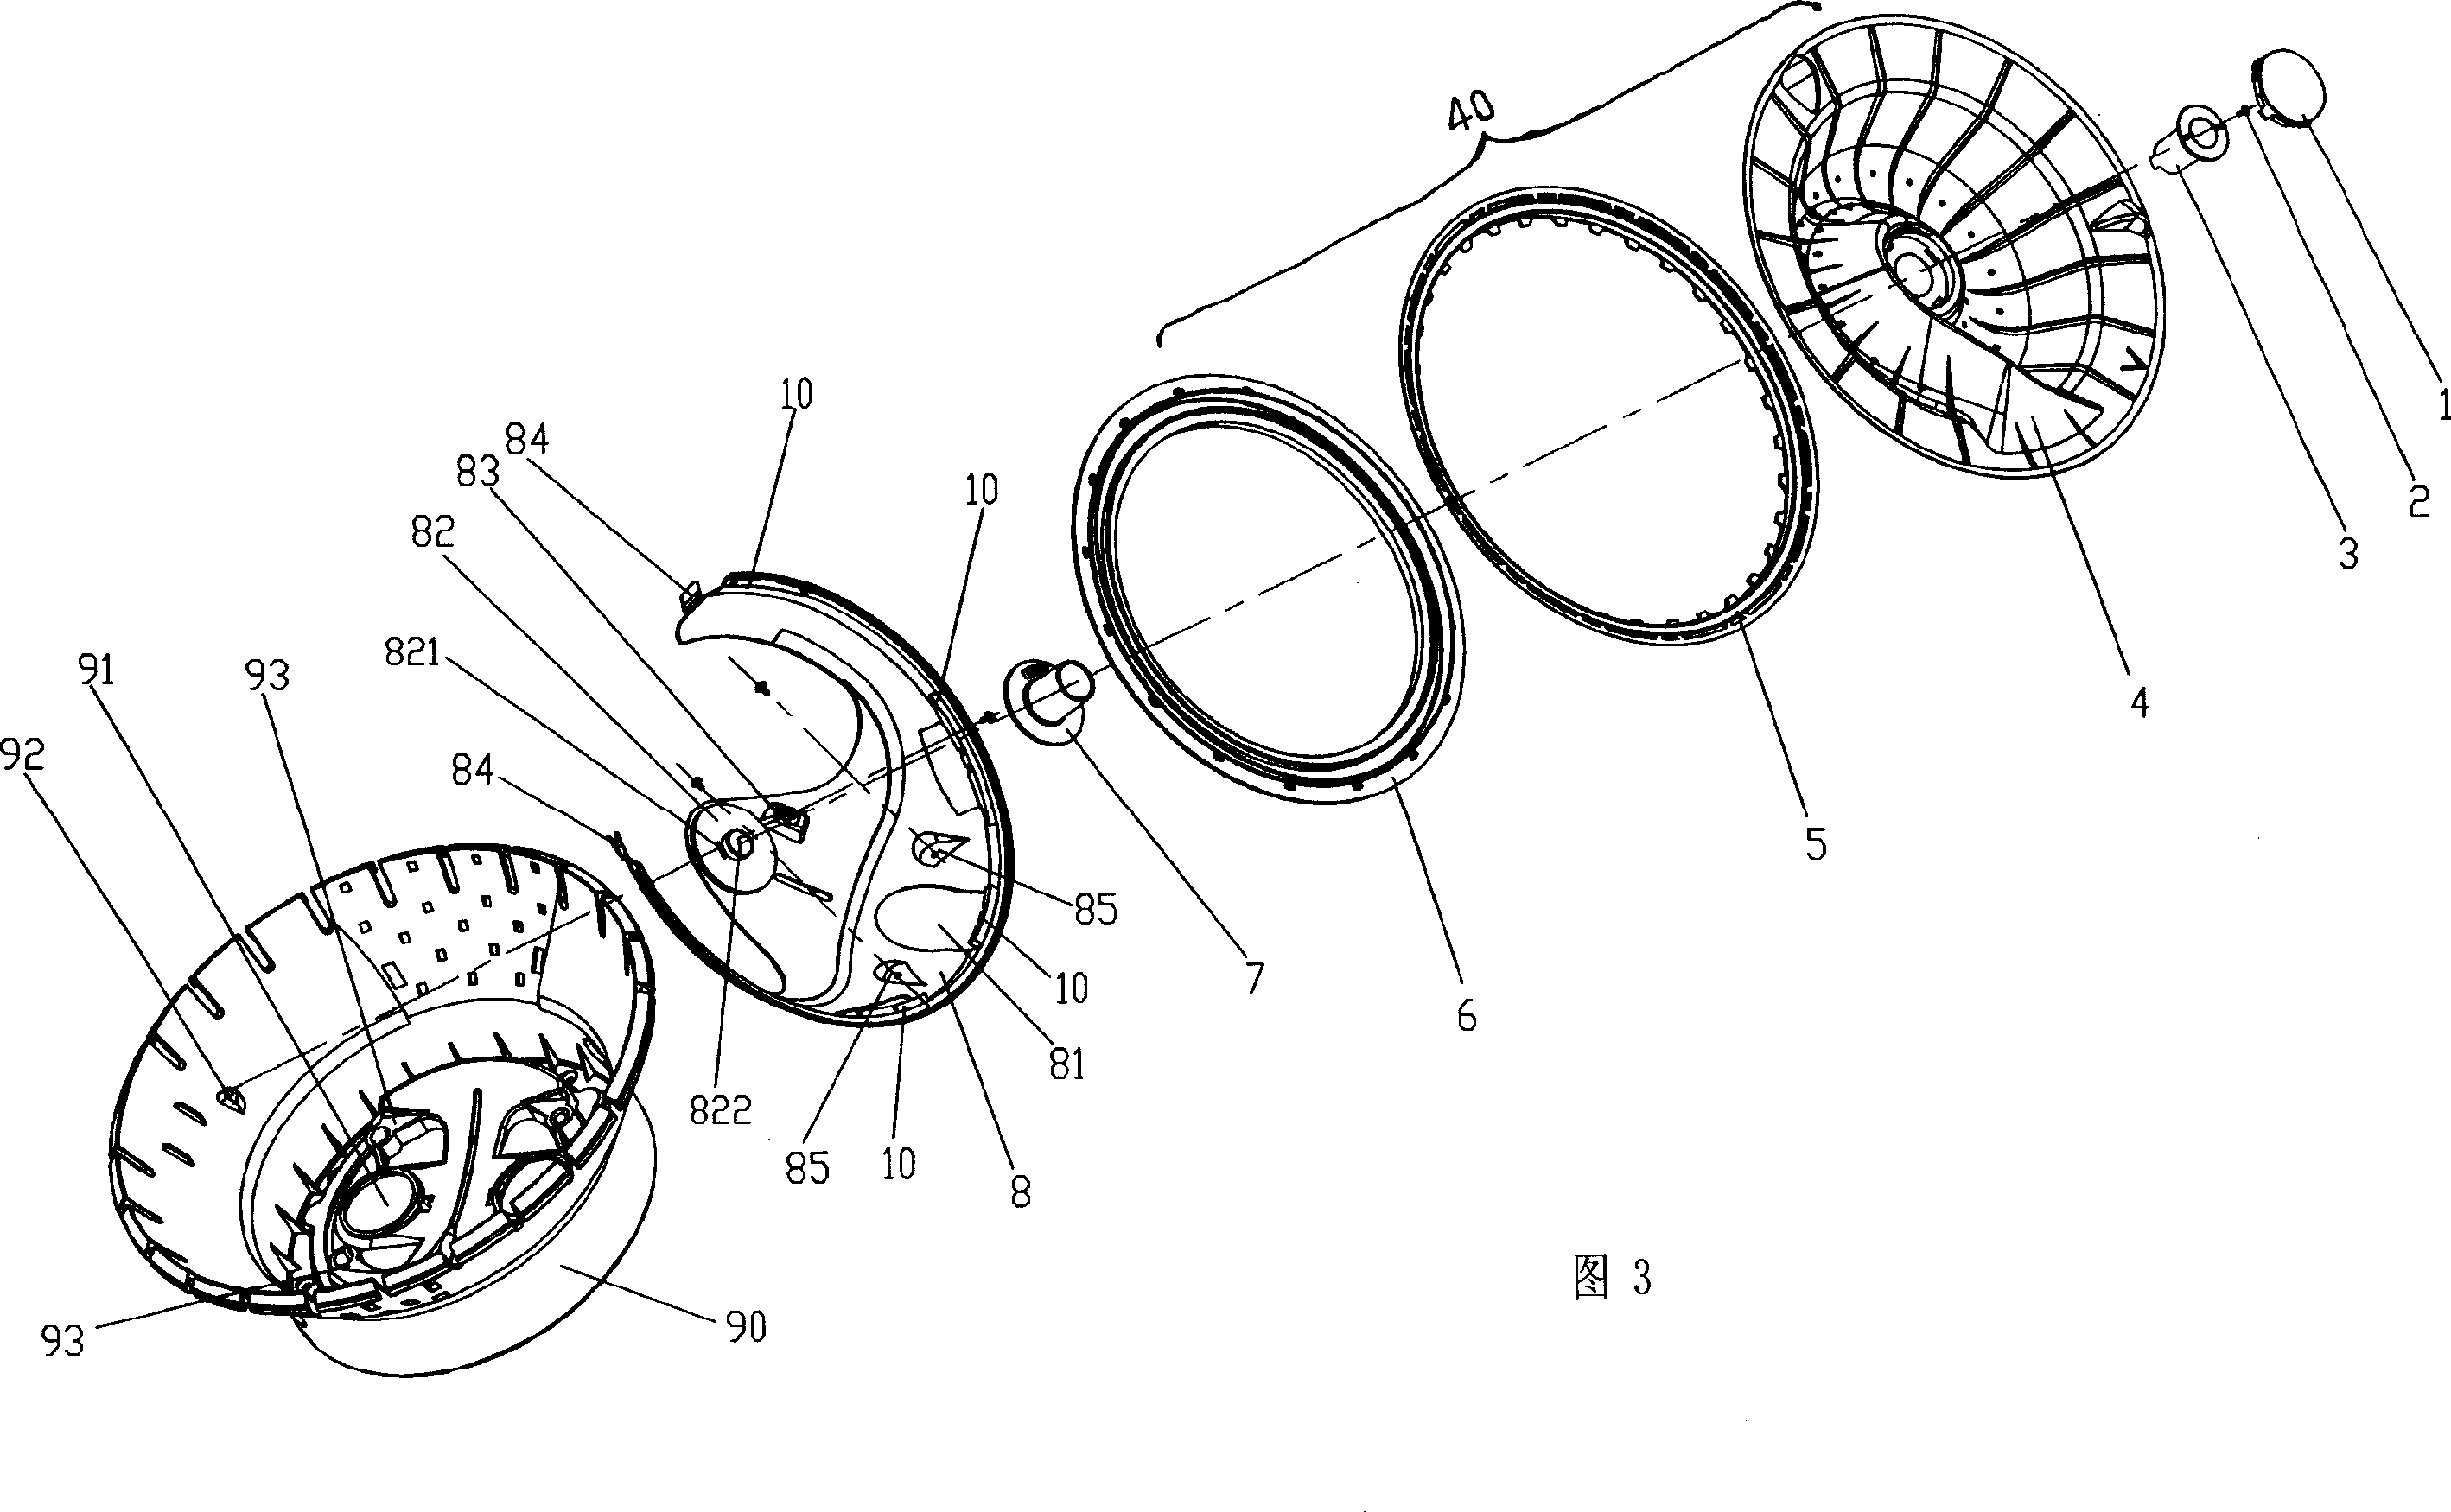 Assembling structure of hung vertical rippled wheel